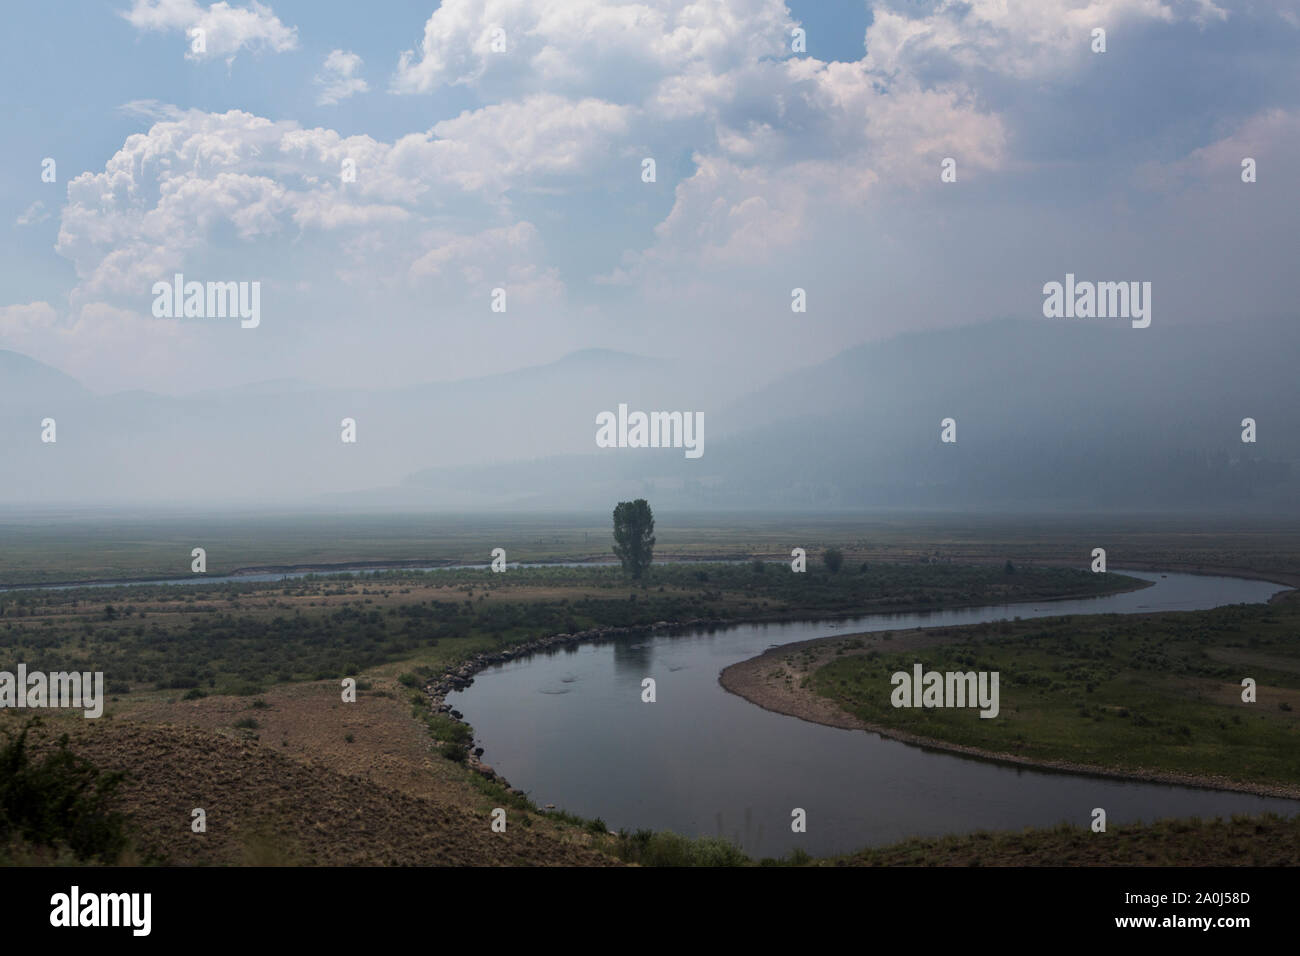 Forest fire smoke obscures the view in southwestern Colorado. Stock Photo